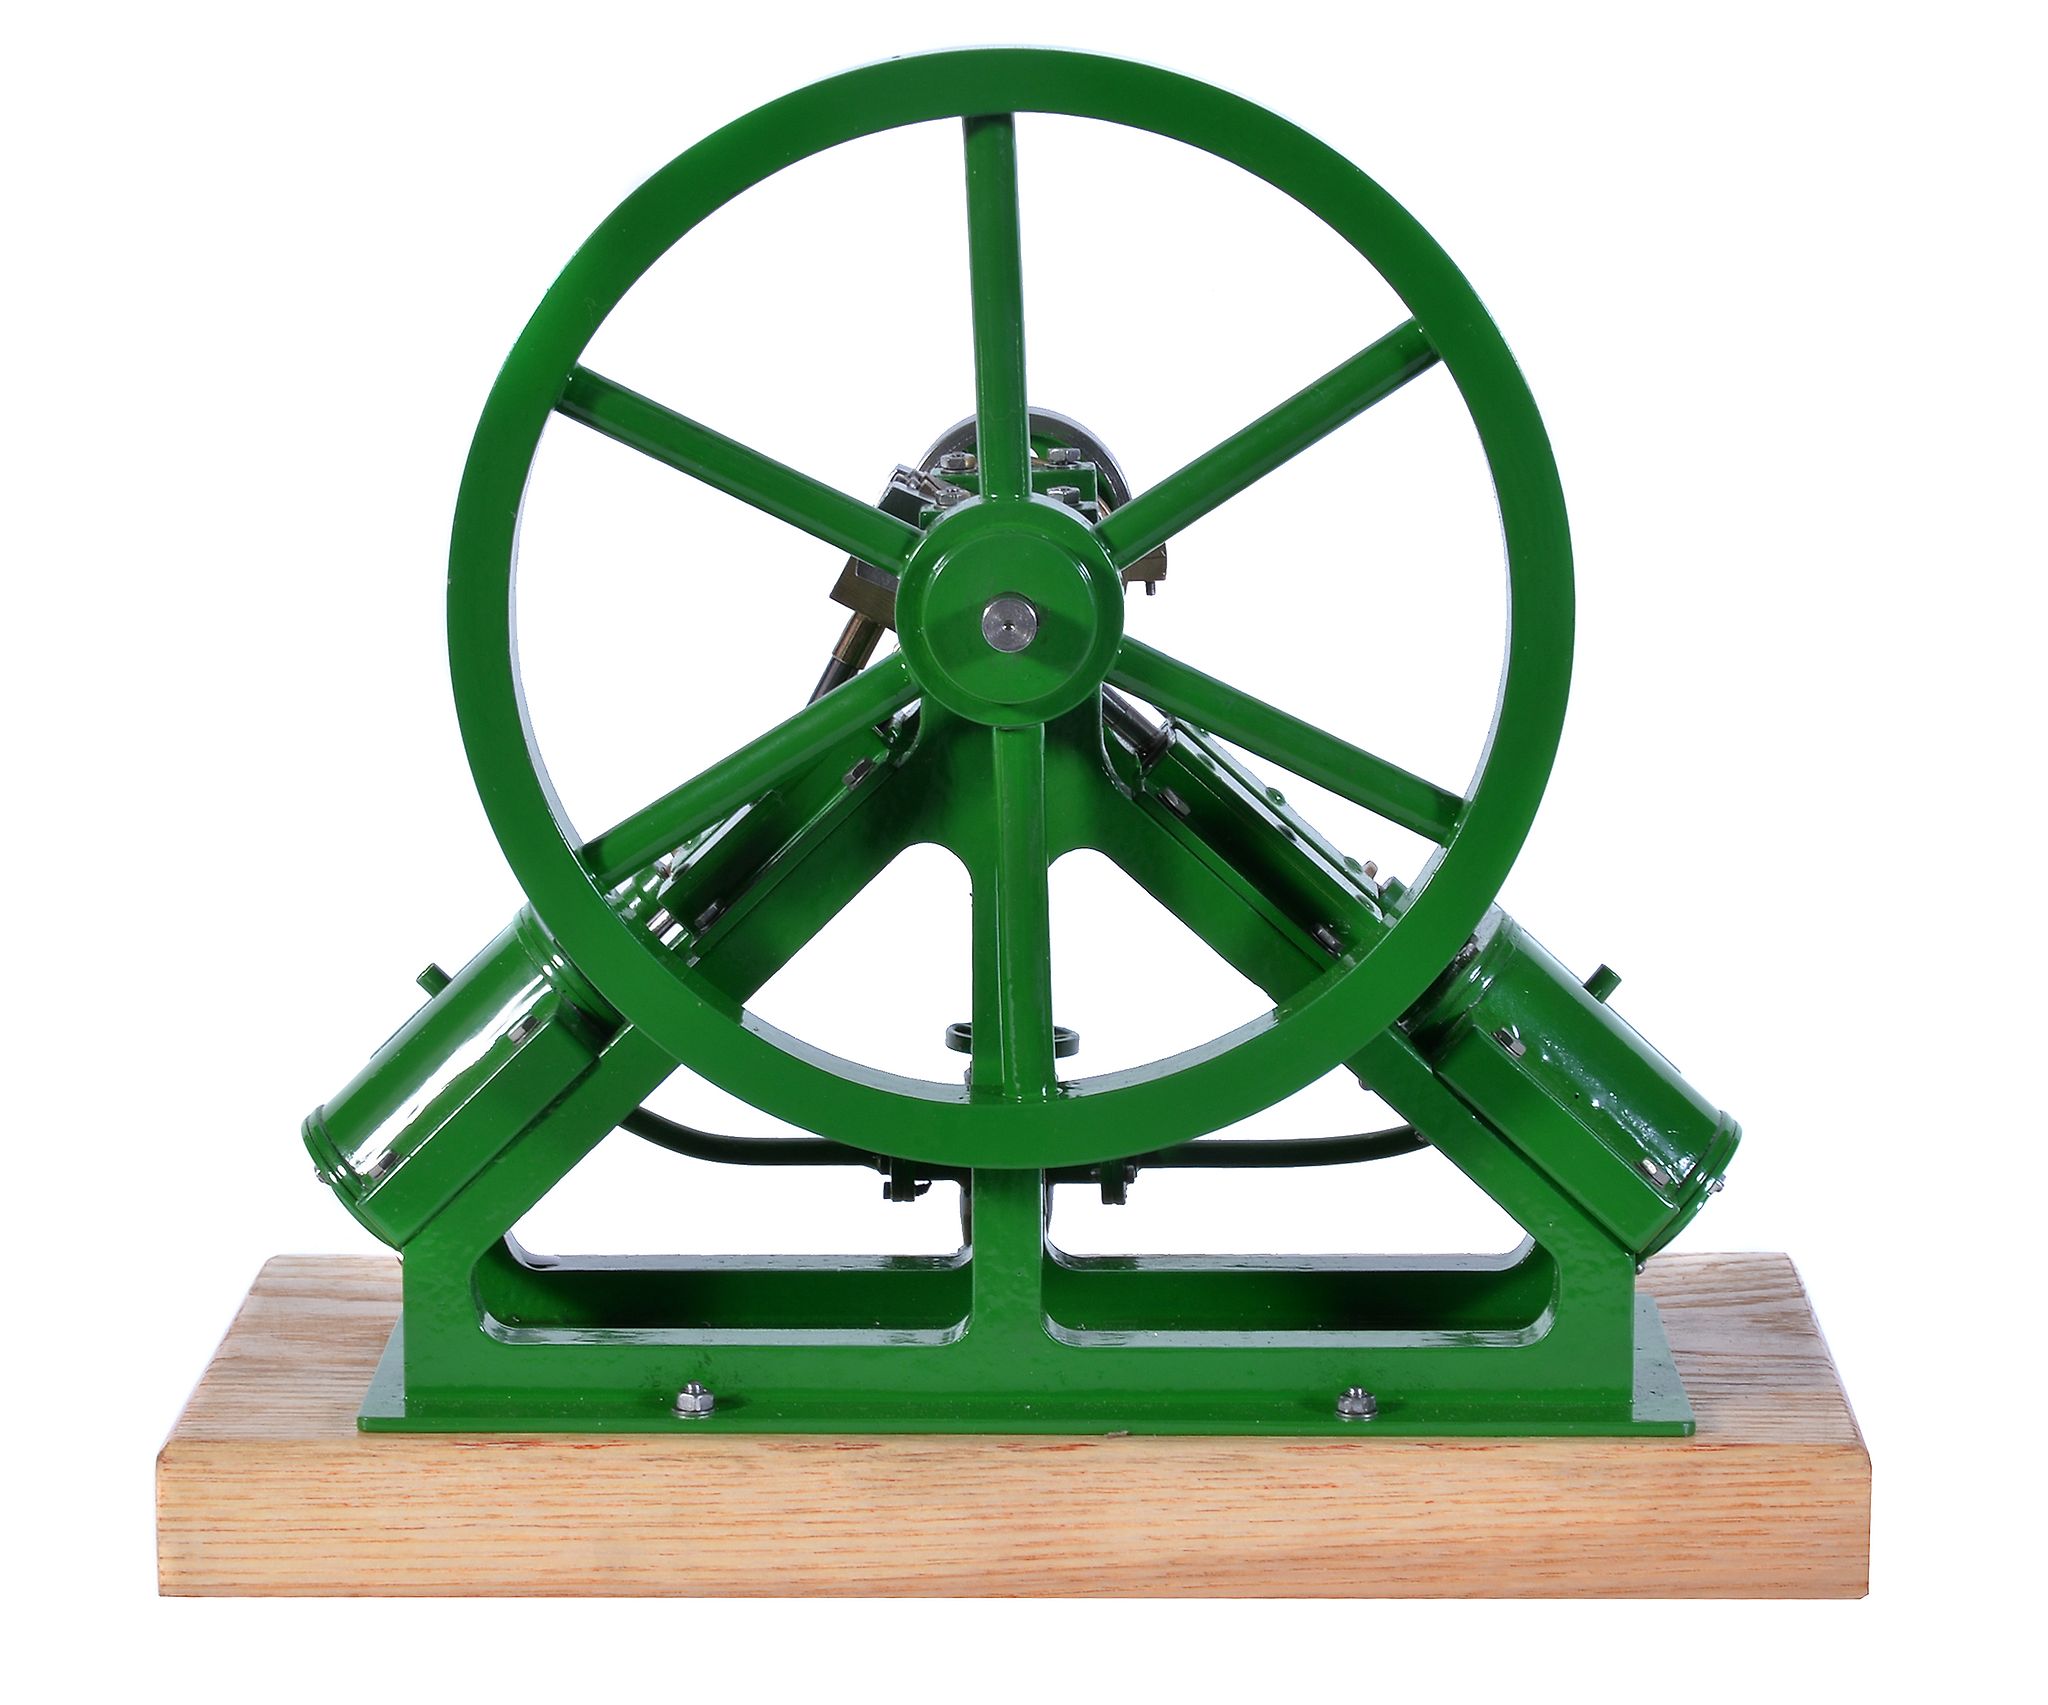 A well-engineered model of a twin diagonal live steam marine engine, built by Mr D. Russell of